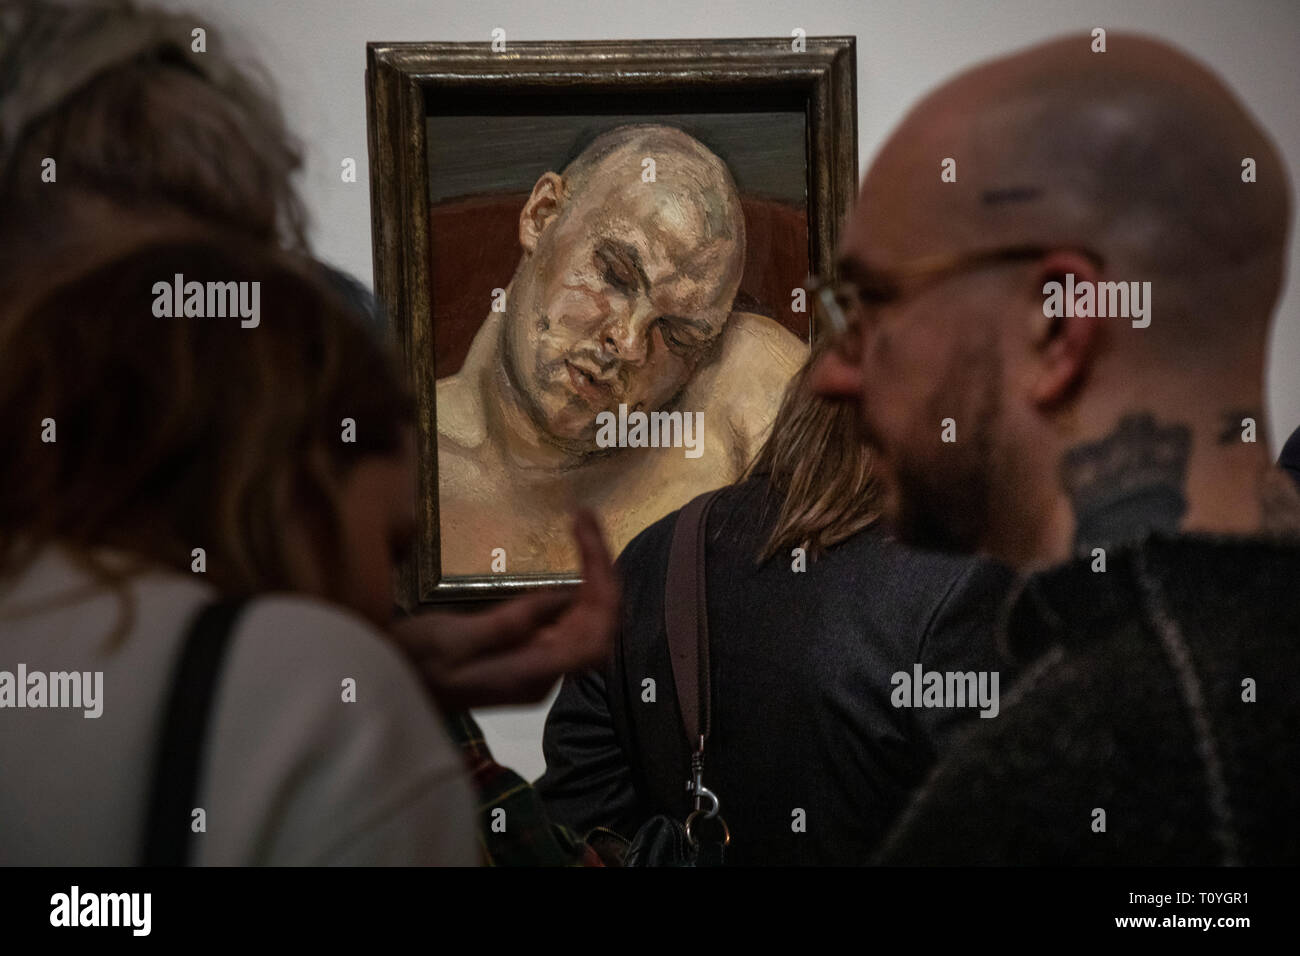 Moscow, Russia. 22nd Mar 2019. The painting 'Leigh Bowery' by Lucian Freud in the Pushkin State Museum of Fine Arts during the exhibition “Francis Bacon, Lucian Freud, and the School of London.” in Moscow, Russia. The artworks provided by the Tate Gallery, London Stock Photo